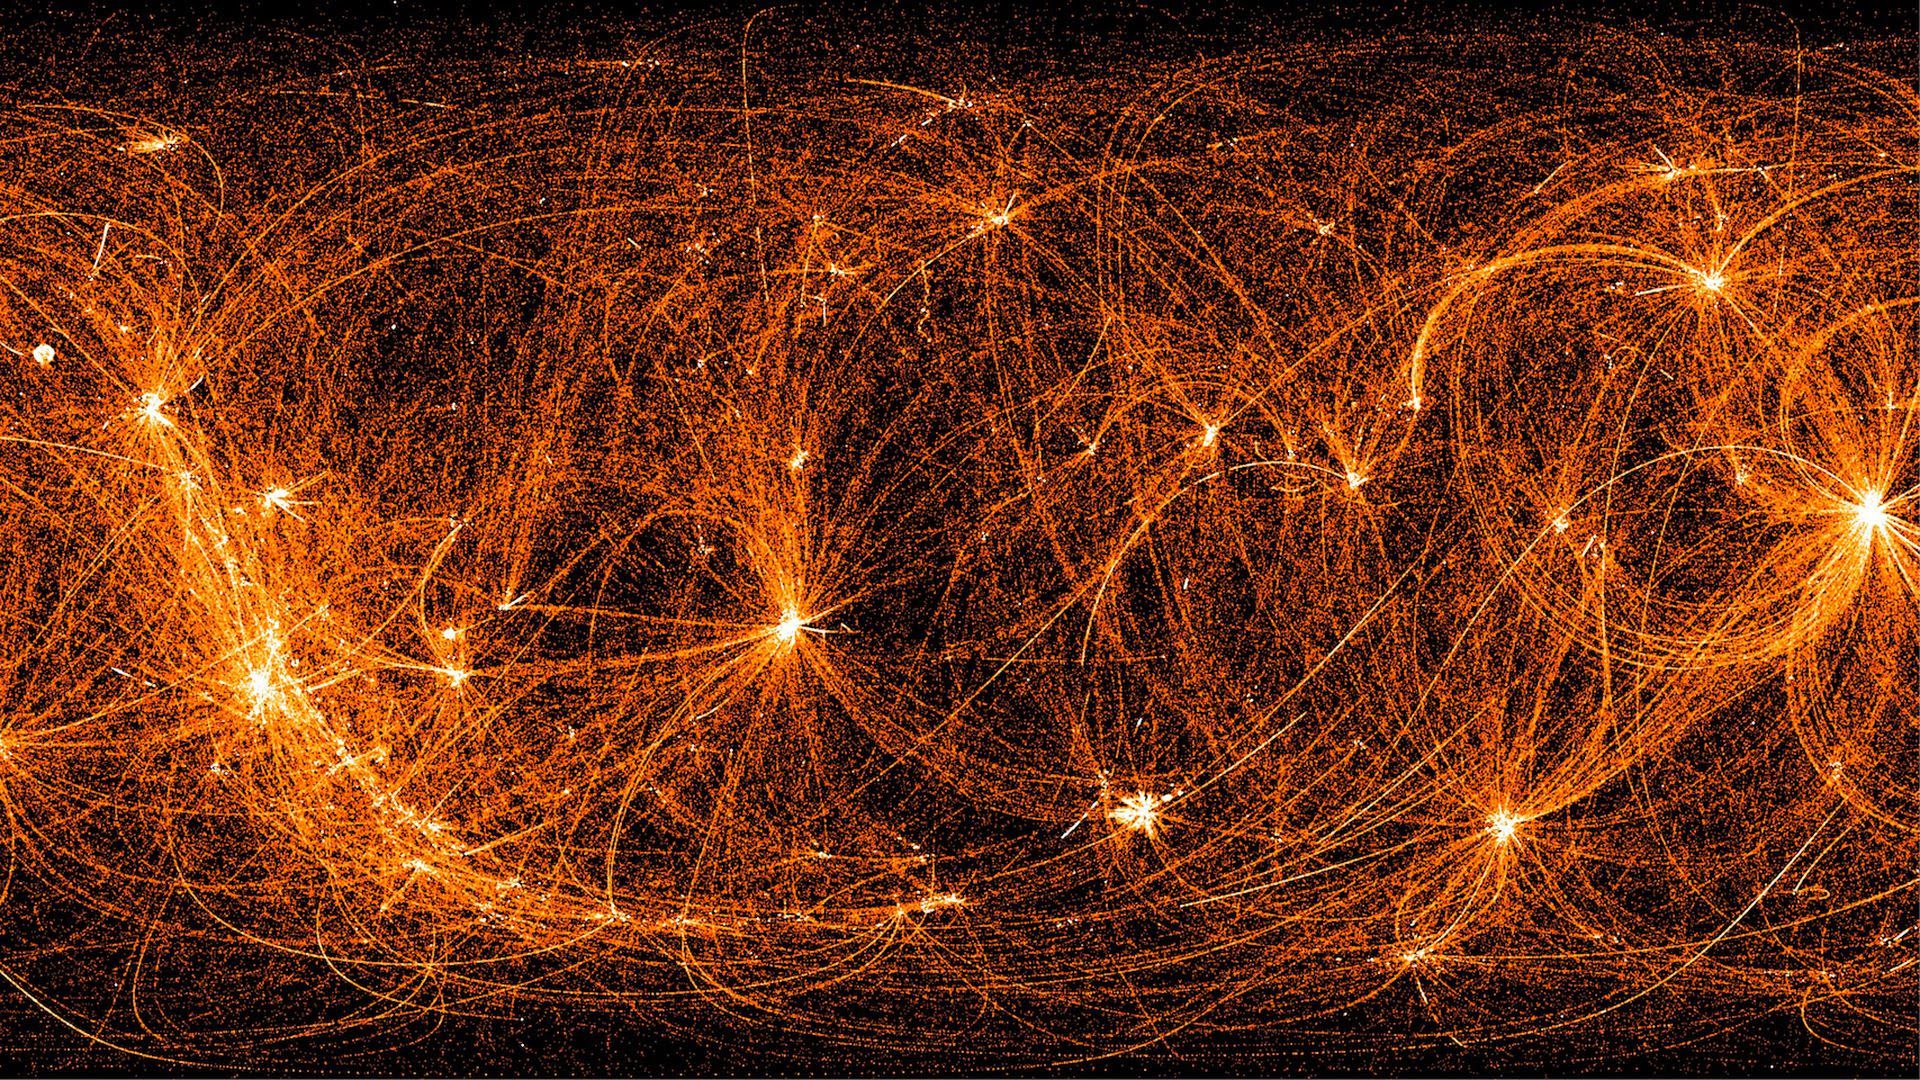 An image of the whole sky showing 22 months of X-ray data from NASA's Neutron star Interior Composition Explorer payload.